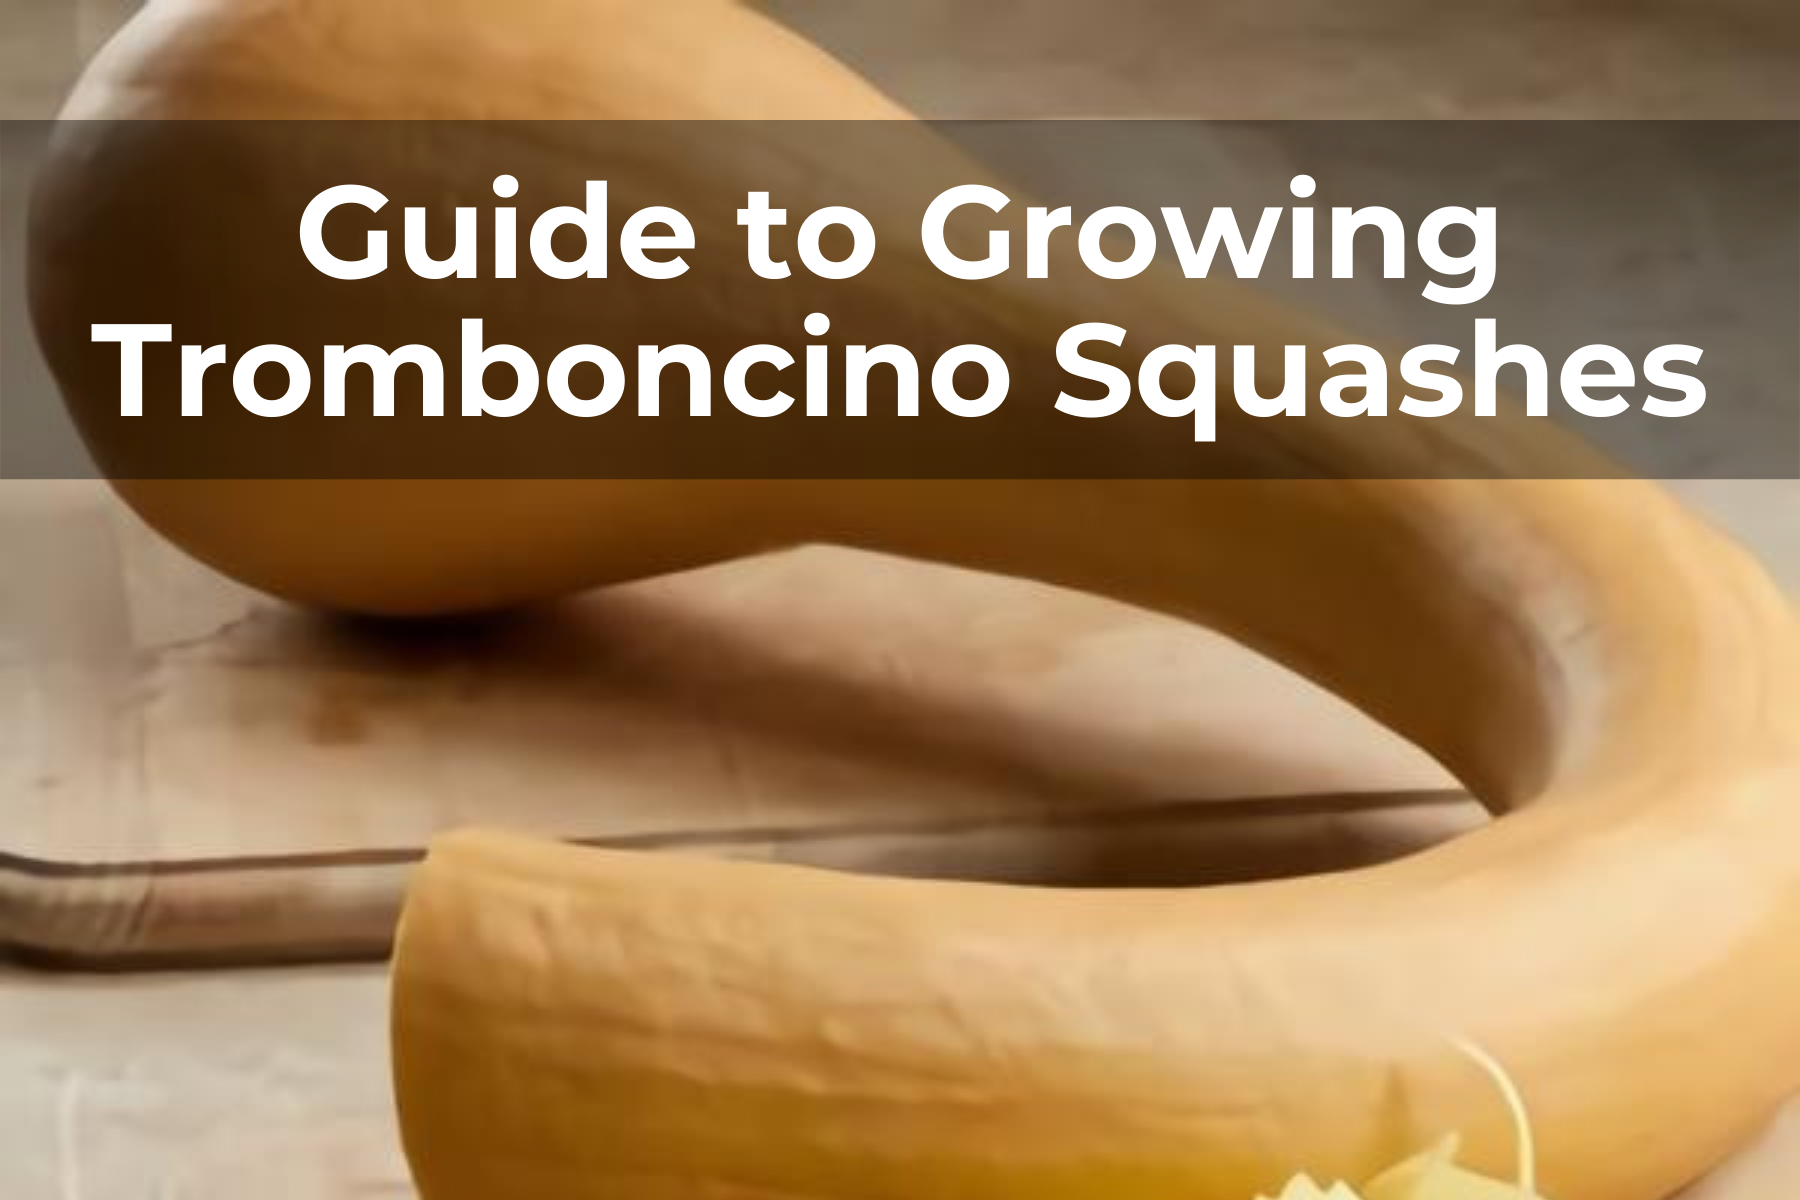 Guide to Growing Tromboncino Squashes